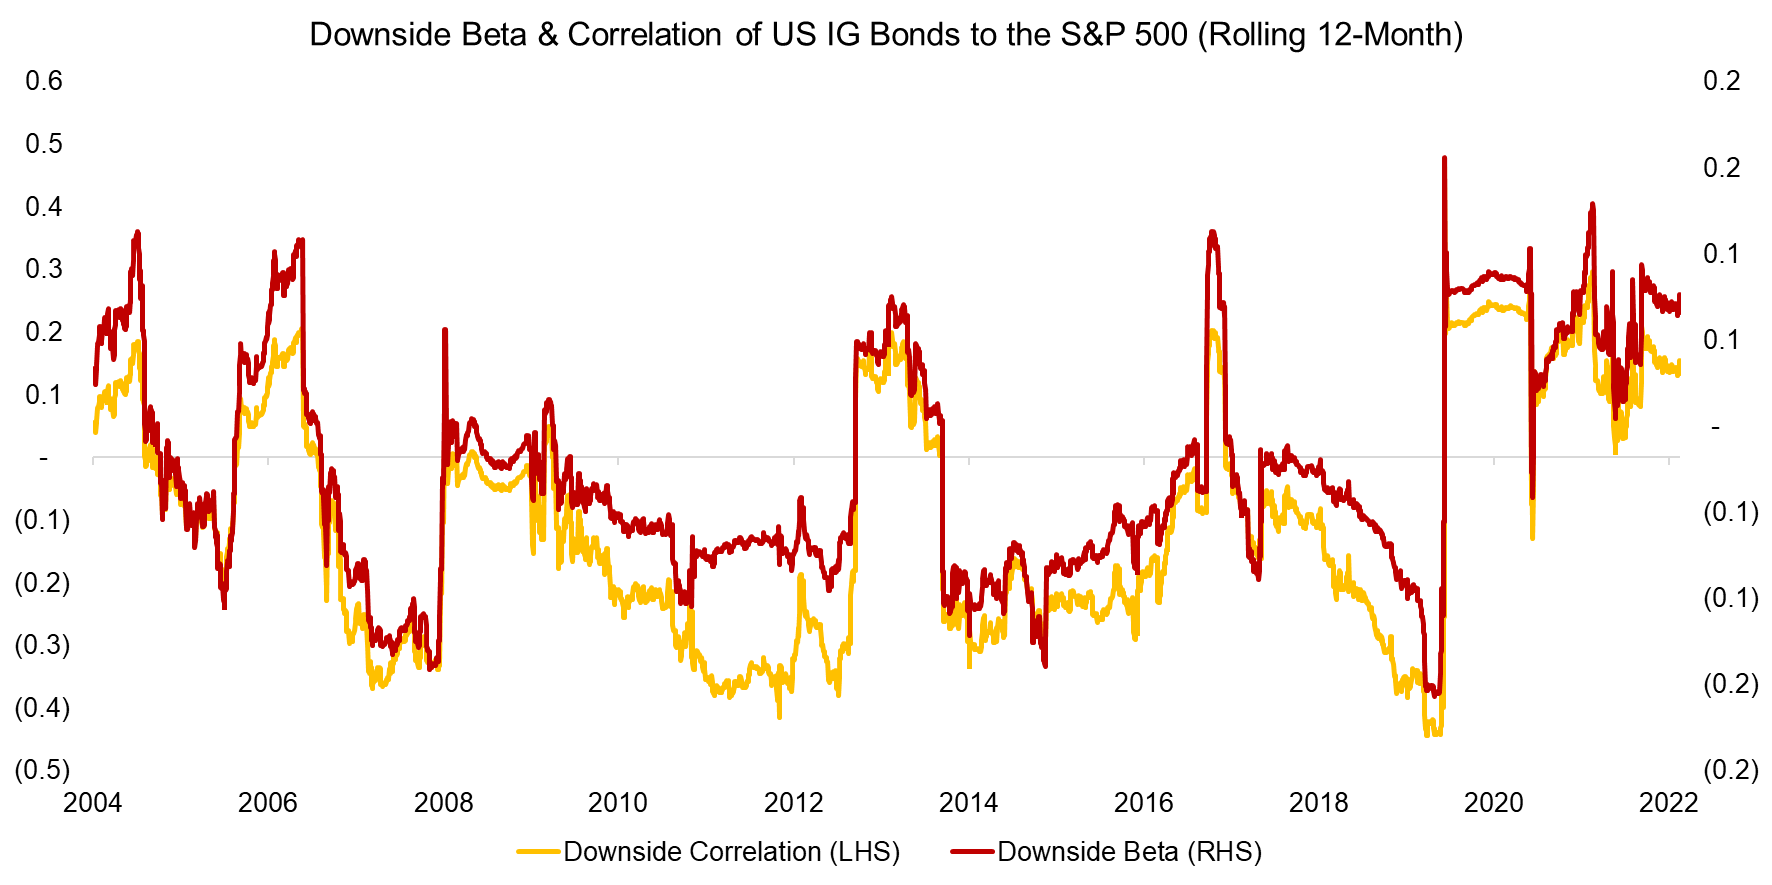 Downside Beta & Correlation of US IG Bonds to the S&P 500 (Rolling 12-Month)